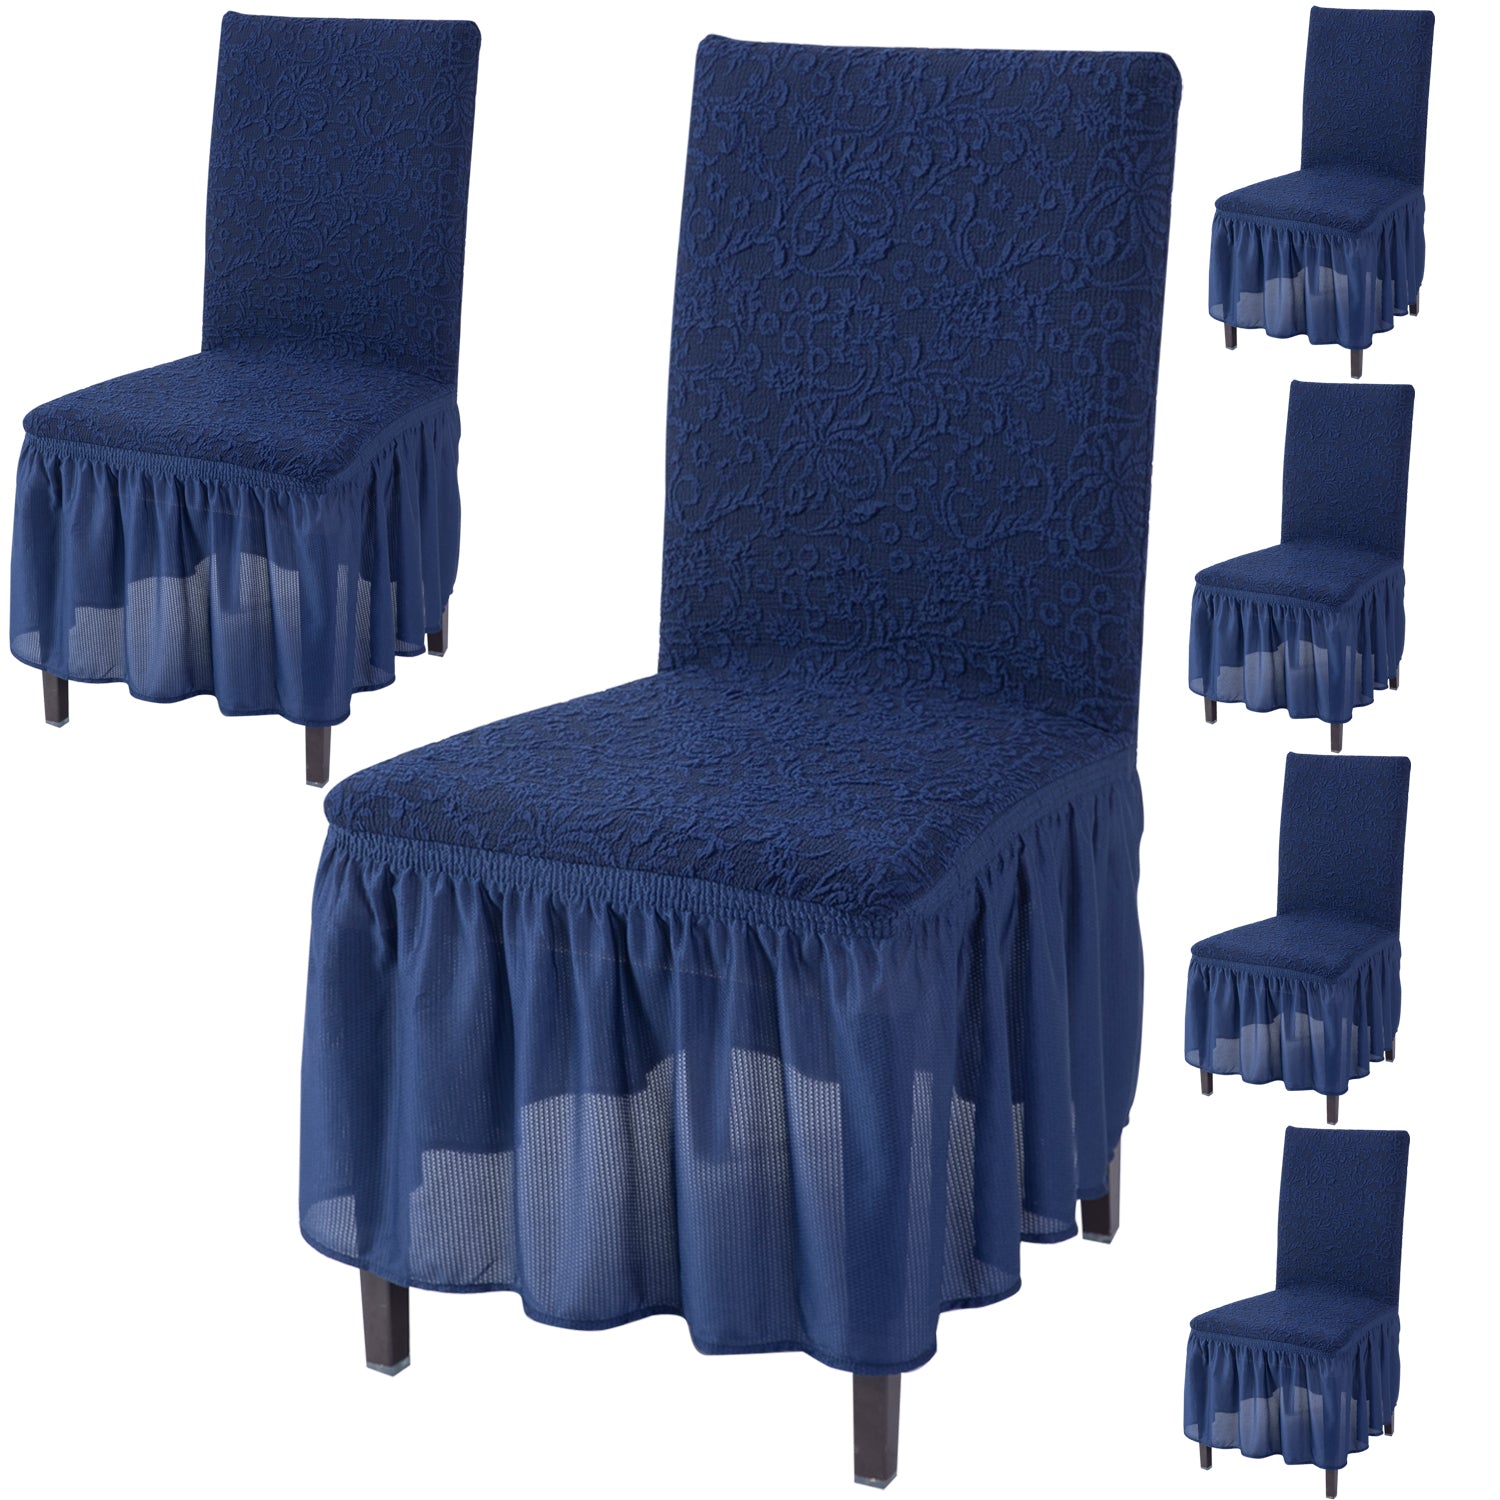 Elastic Stretchable Designer Woven Jacquard Dining Chair Cover with Frill, Navy Blue